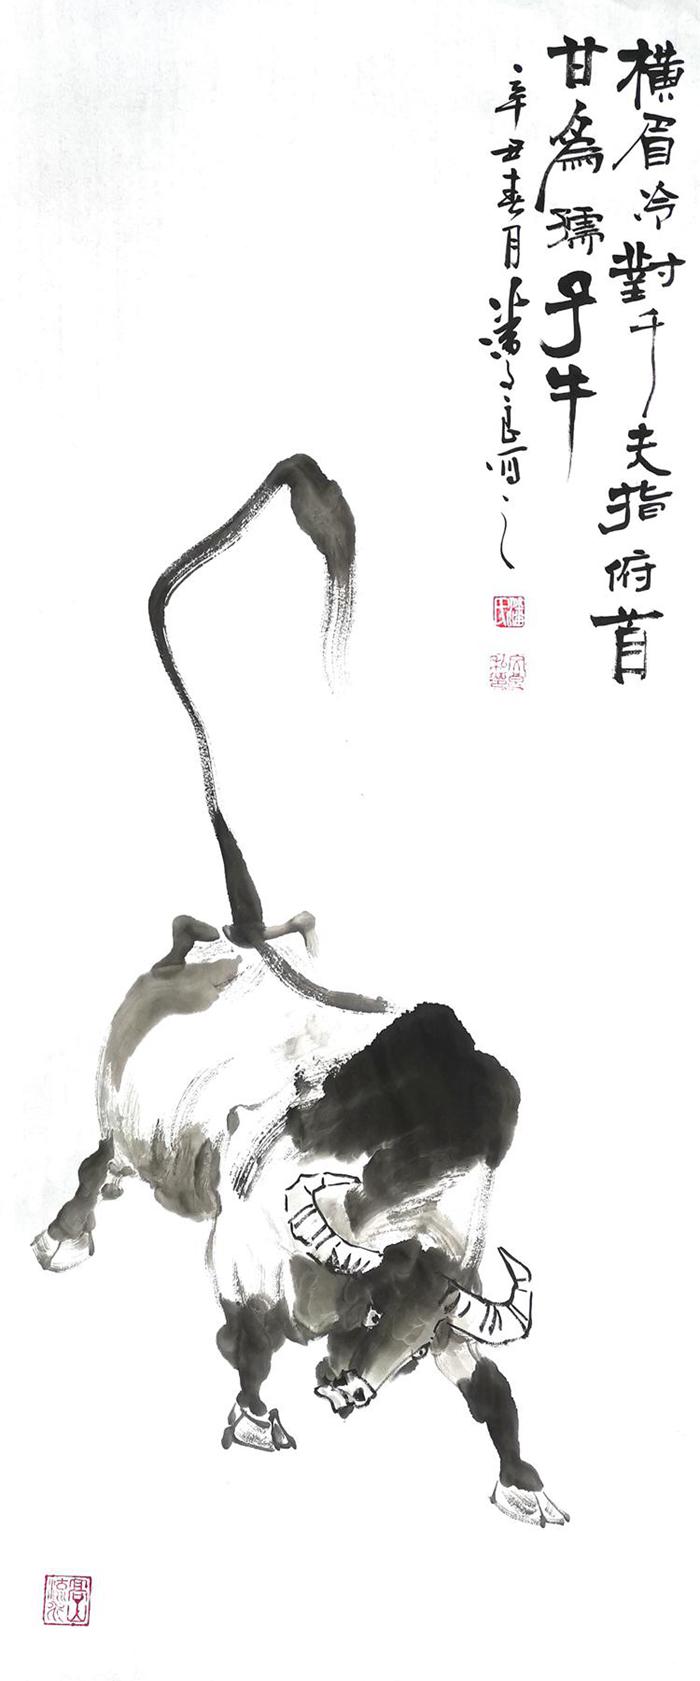 Check out these water-ink paintings to welcome the Year of the Ox